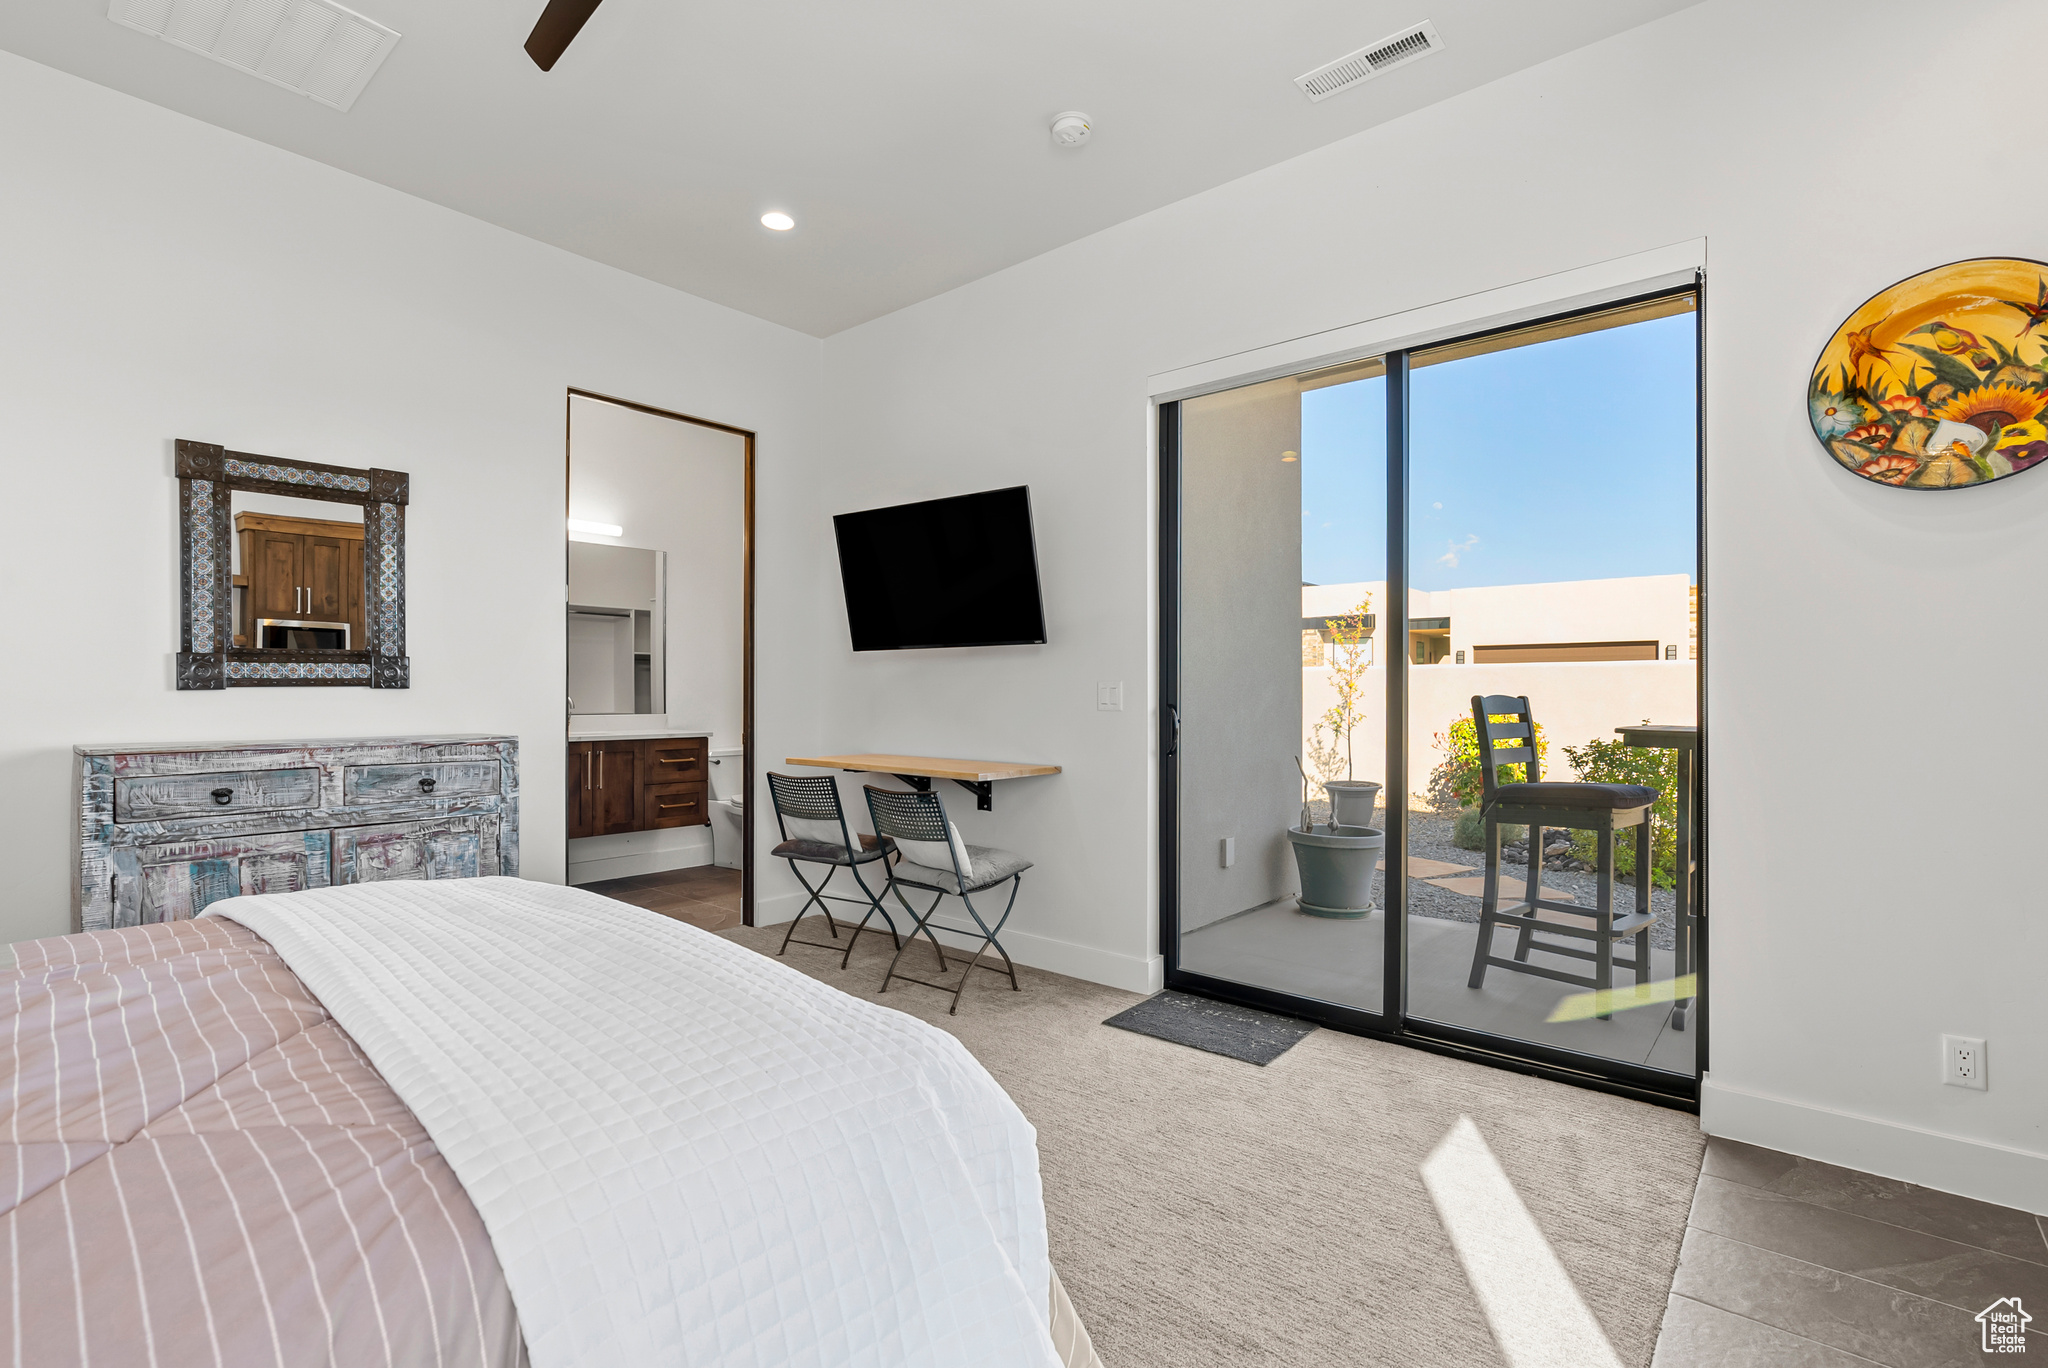 Bedroom featuring access to exterior, ceiling fan, and light tile floors, Casita